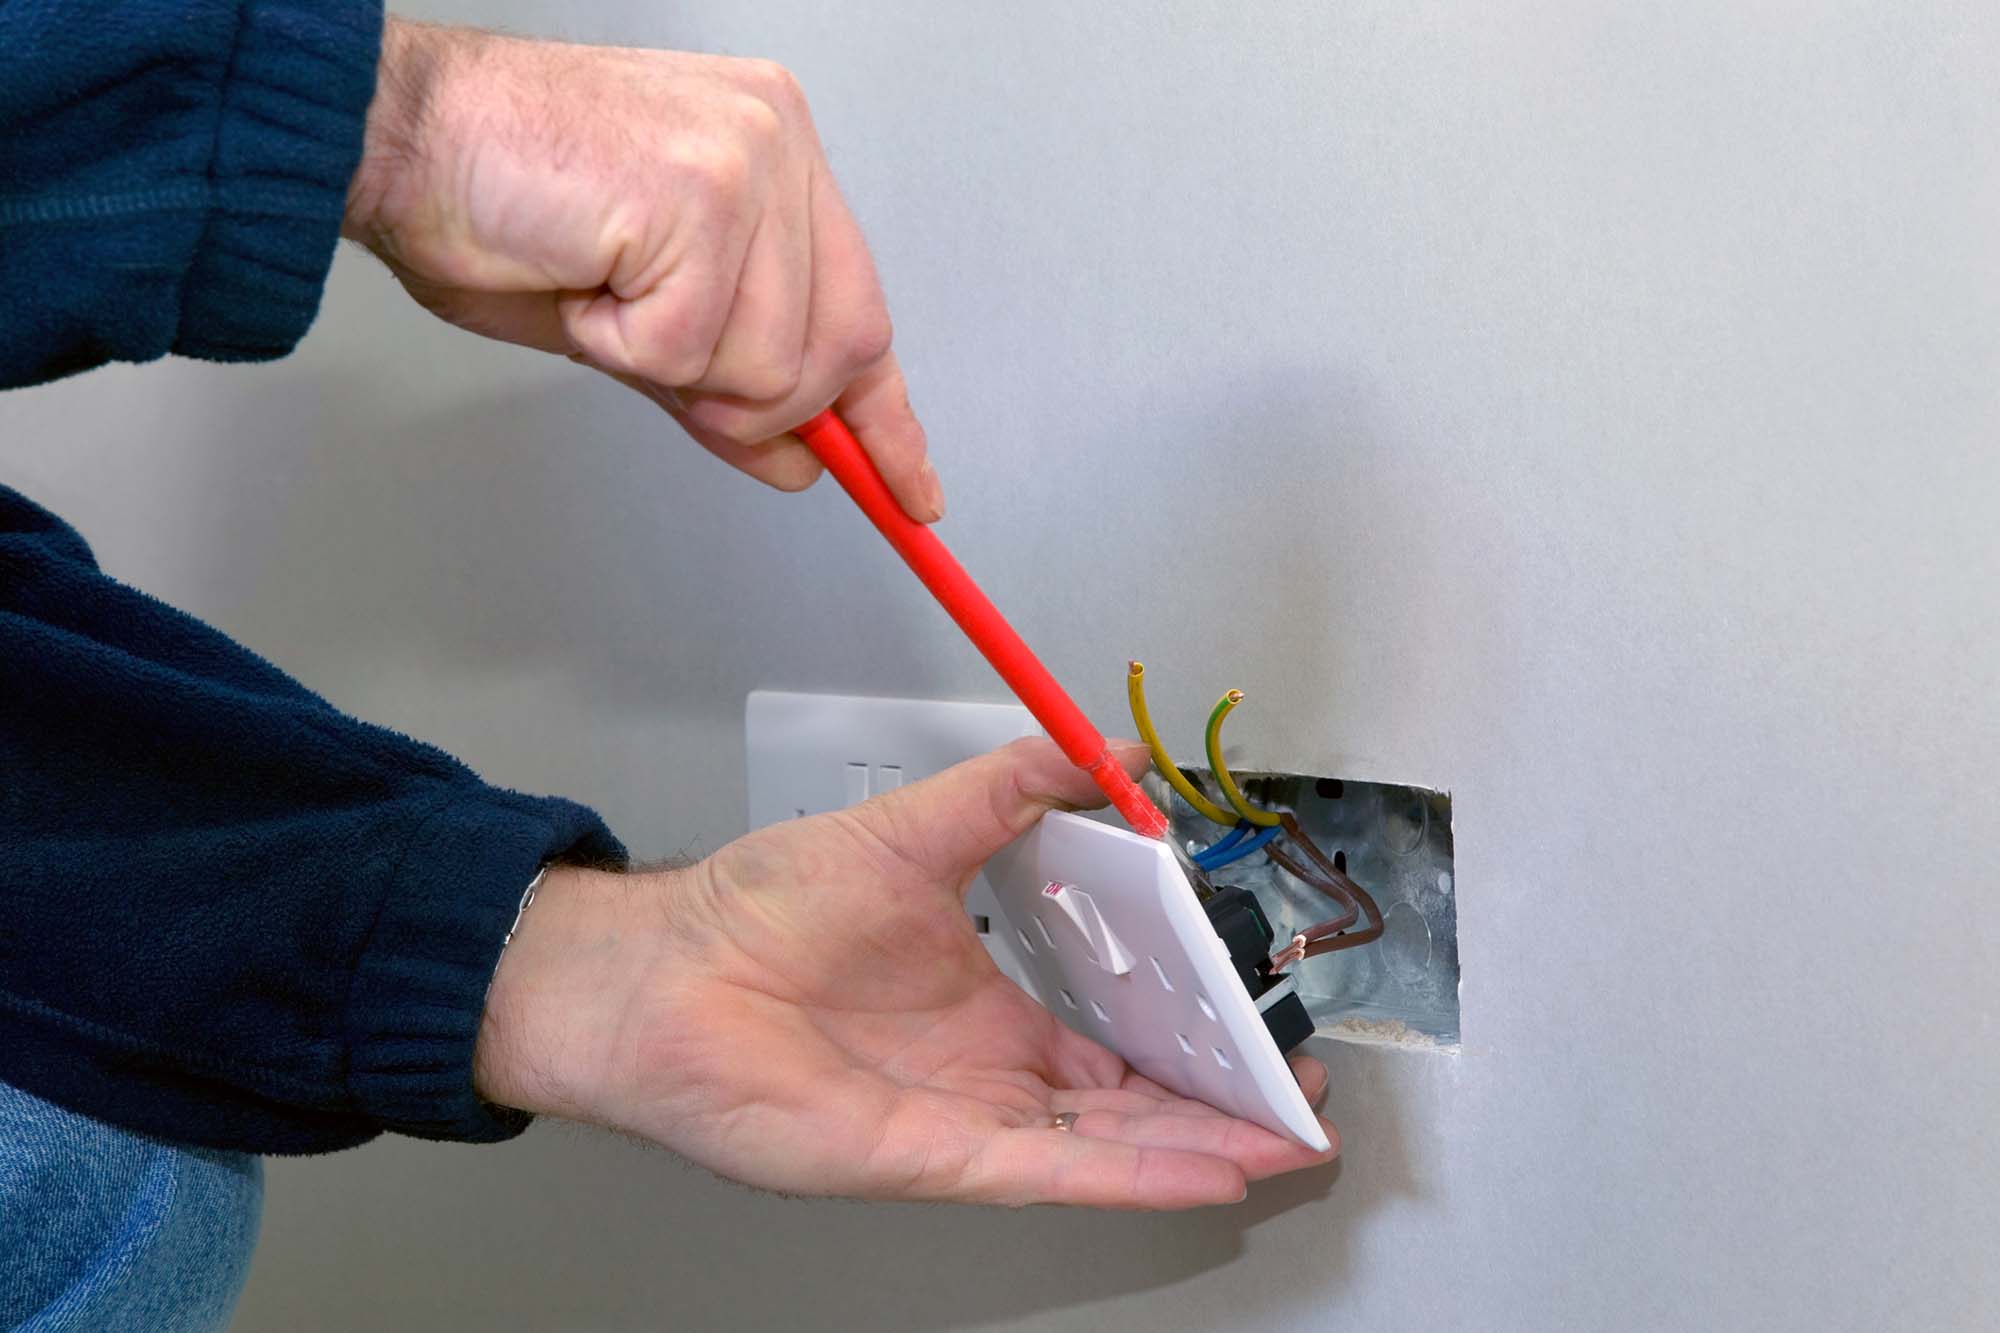 Electrical socket fitting